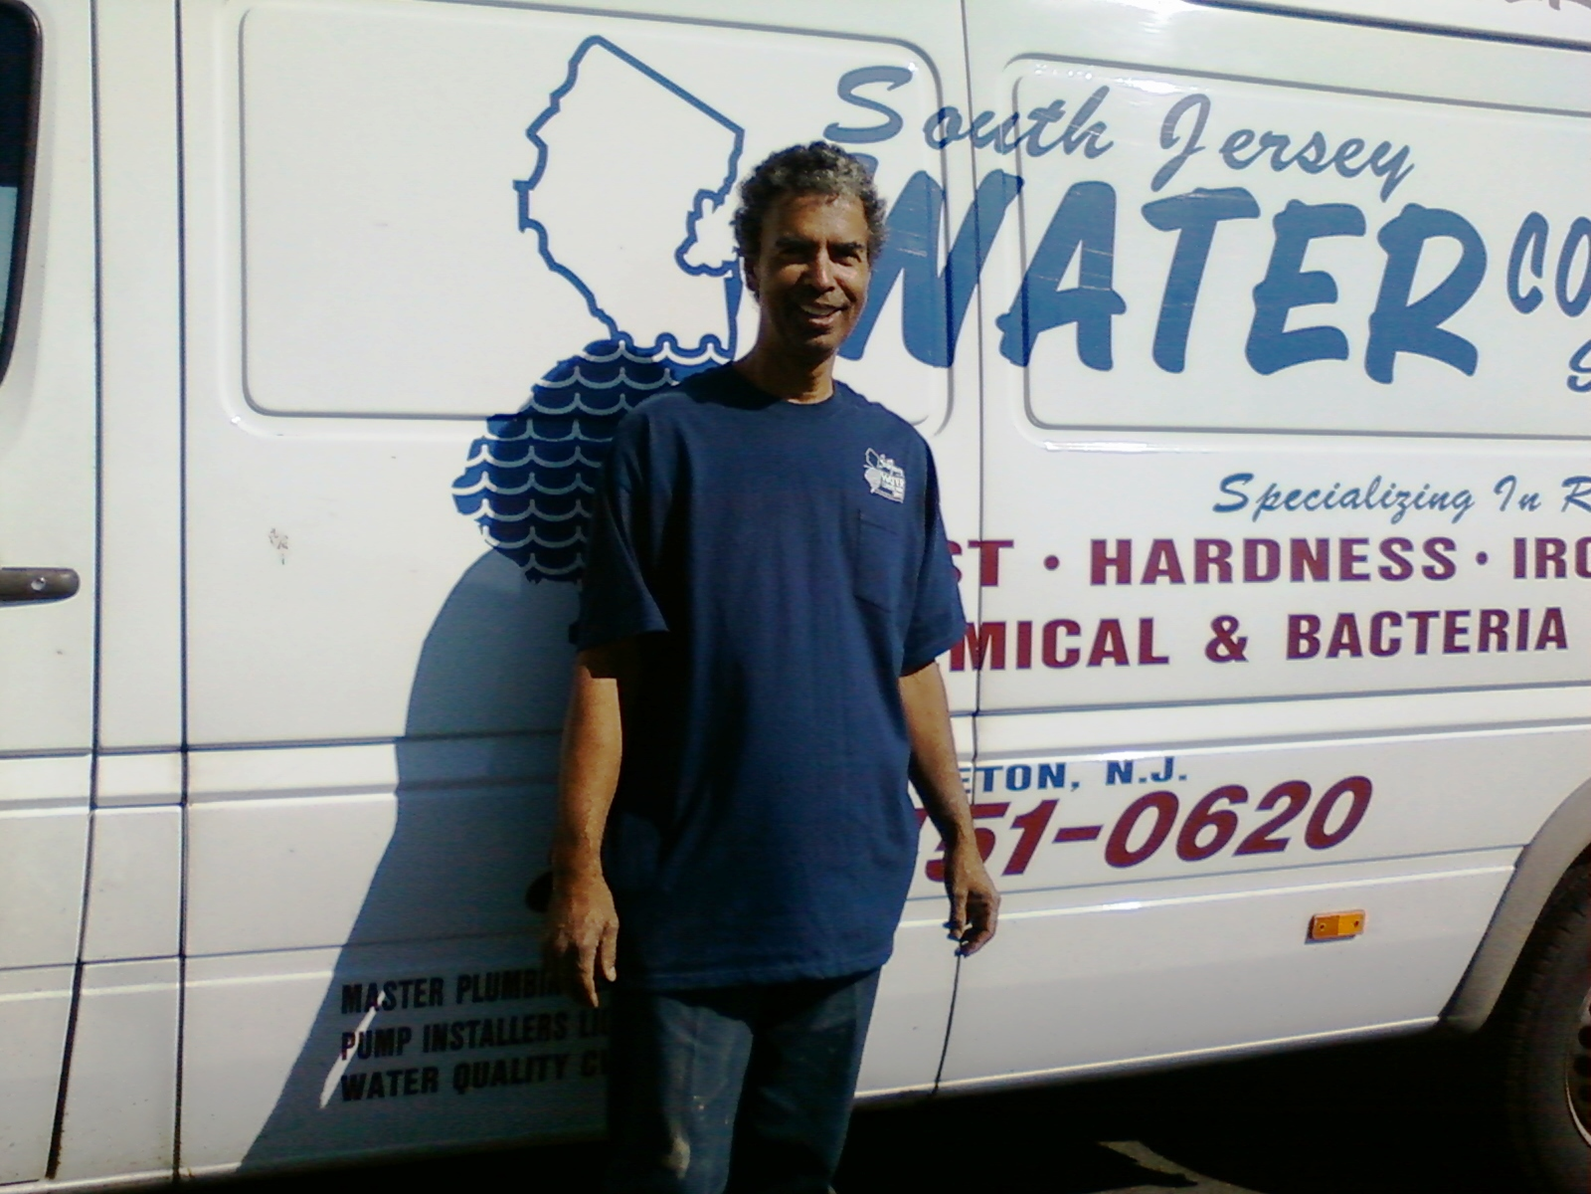 David is one of many individuals who have overcome barriers to employment at Easter Seals NJ